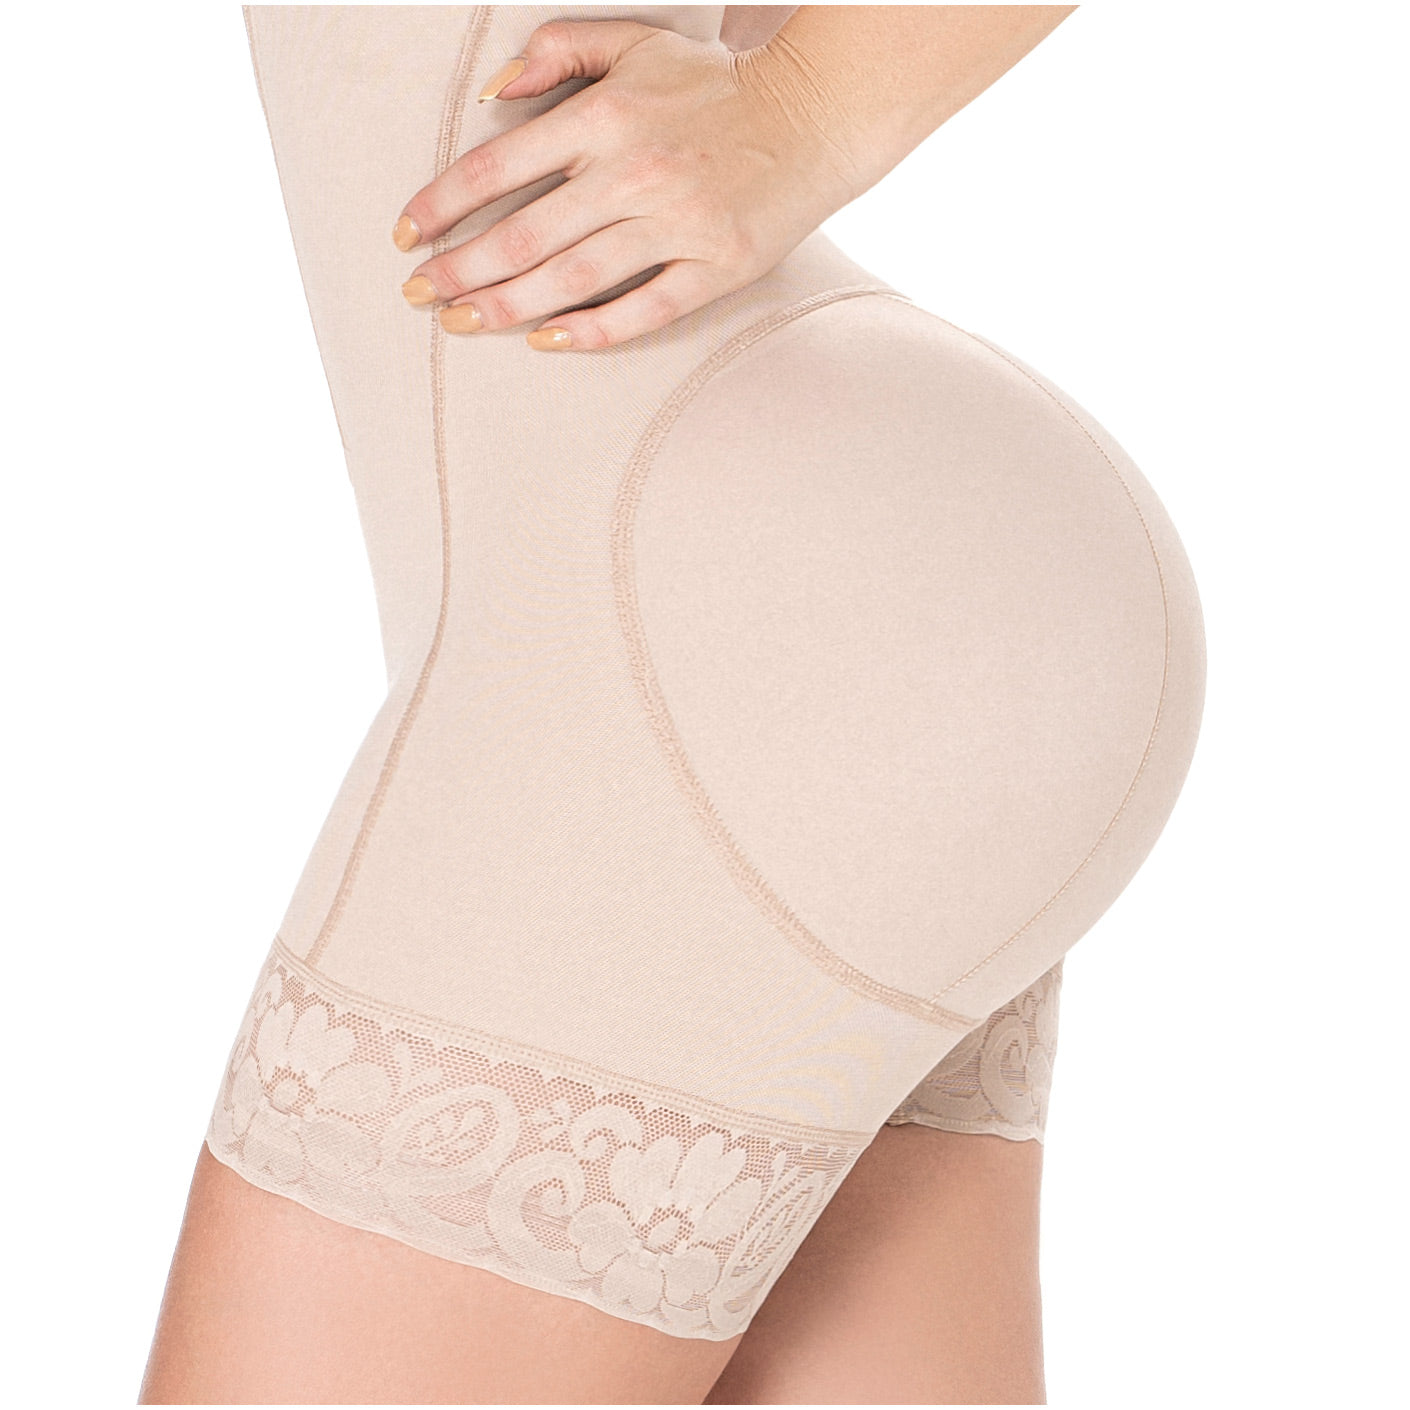 Tummy Tuck Post-Surgery and Daily Use Shapewear with Flat Zipper, Open Bust, & Medium Compression Diane & Geordi 2396-4-Shapes Secrets Fajas